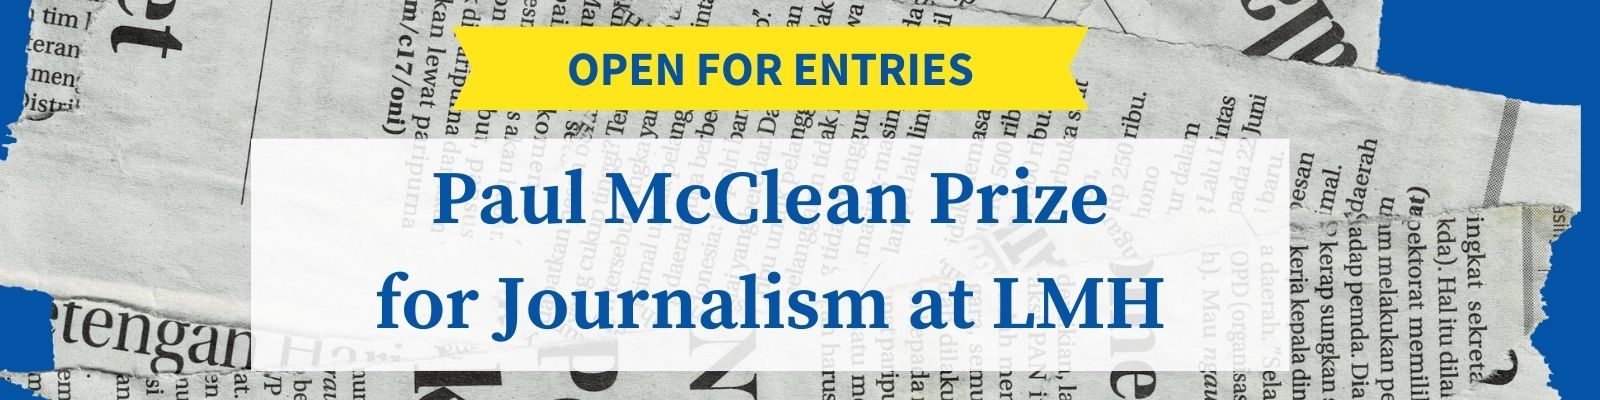 graphic with newspaper clippings with the text: Open for Entries - Paul McClean Prize in Journalism at LMH